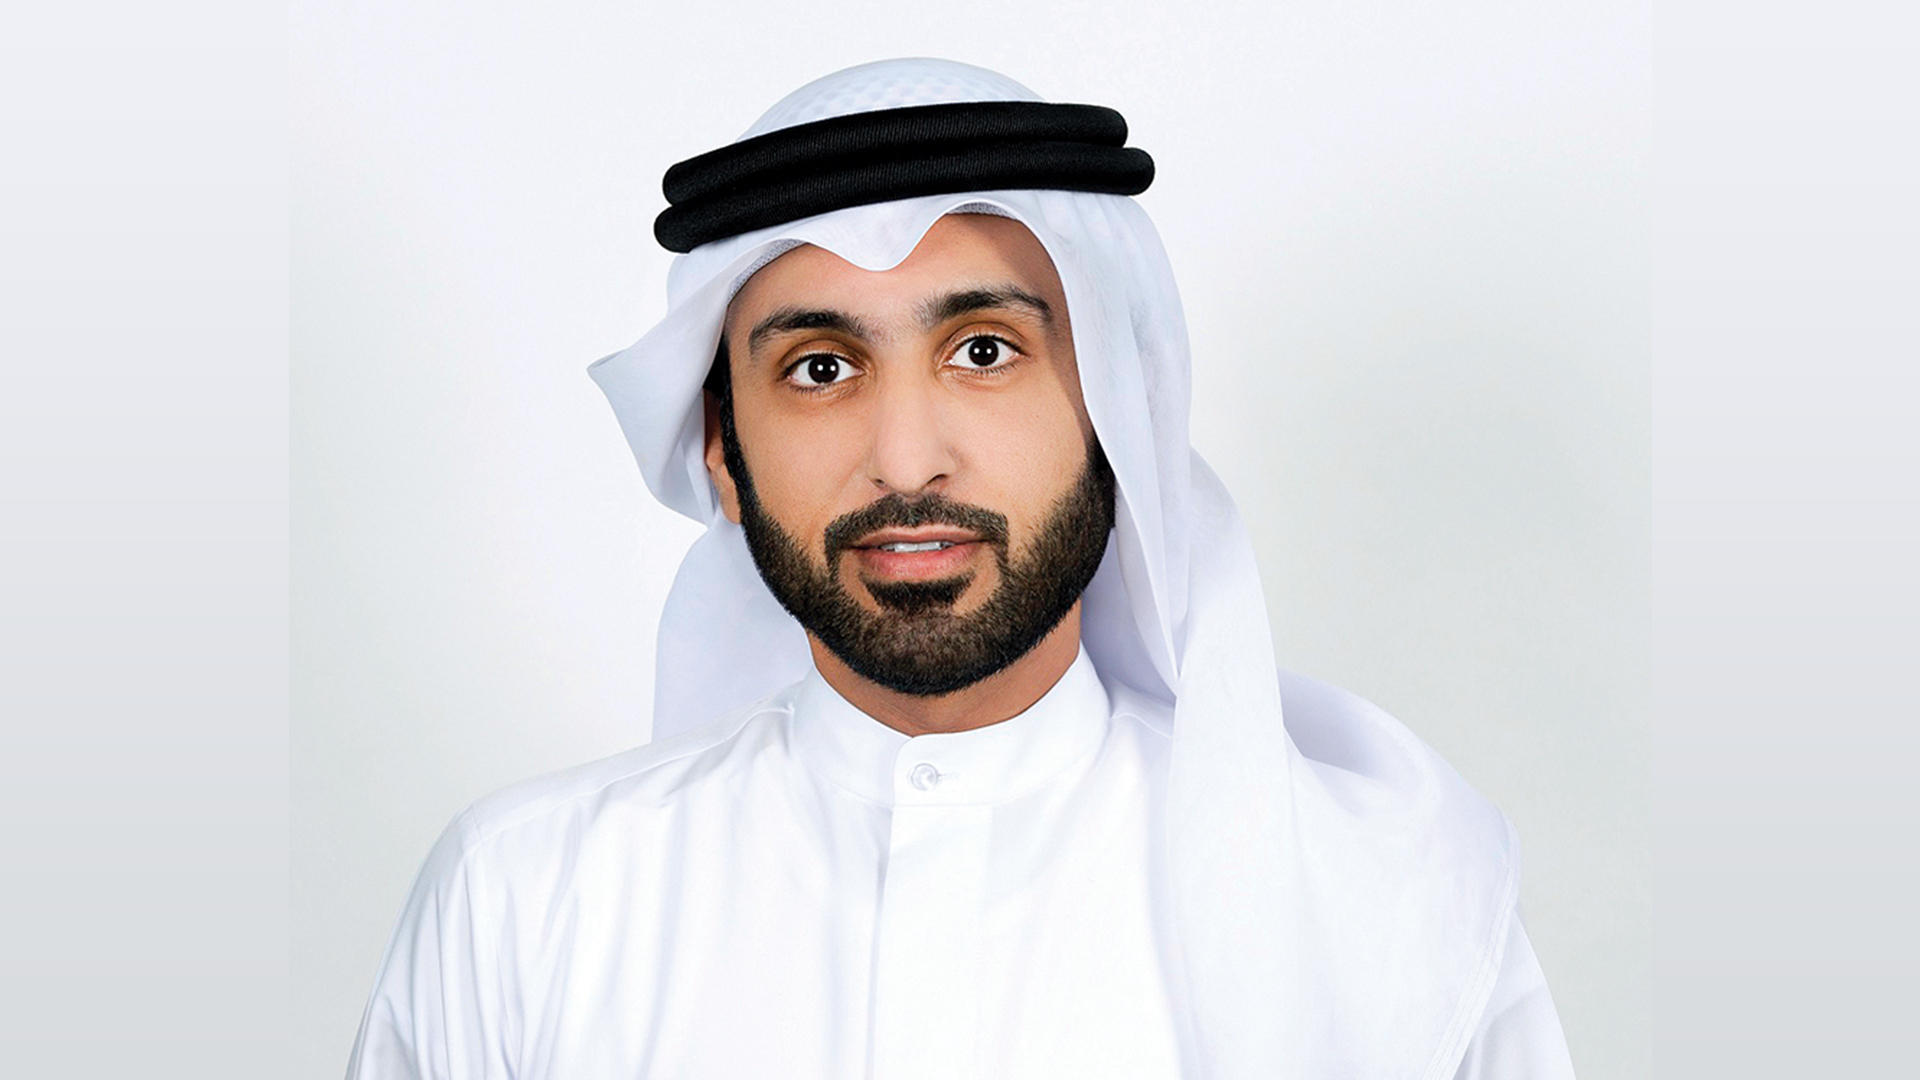 Khalid bin Saqr Al Qasimi: “Aman” protects residents and property from fire hazards